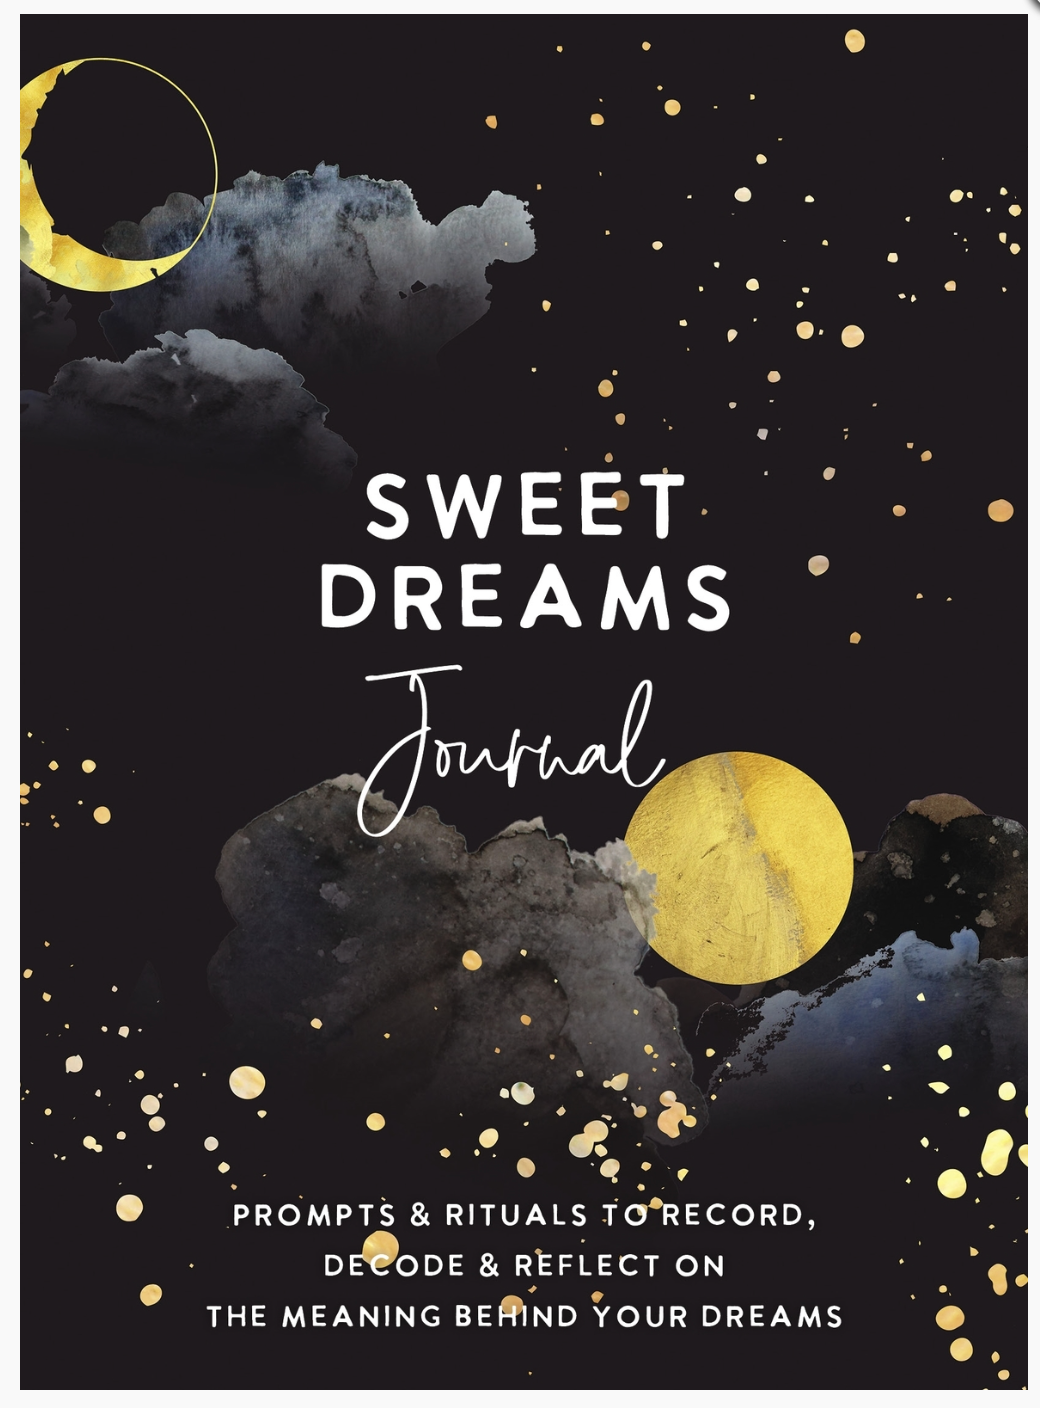 Sweet Dreams Journal: Prompts & Rituals to Record, Decode & Reflect on the Meaning Behind Your Dreams